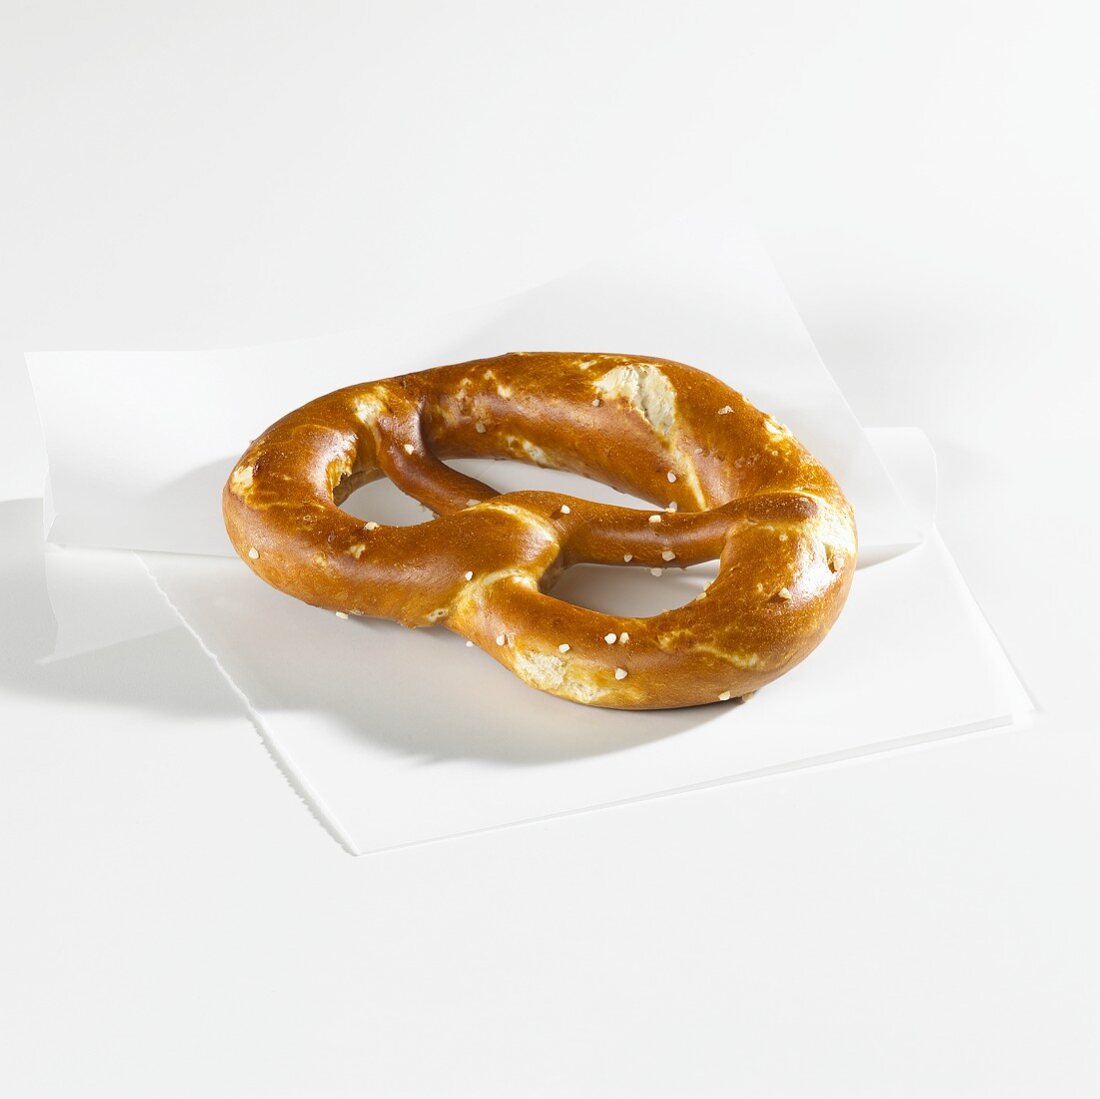 A pretzel on greaseproof paper